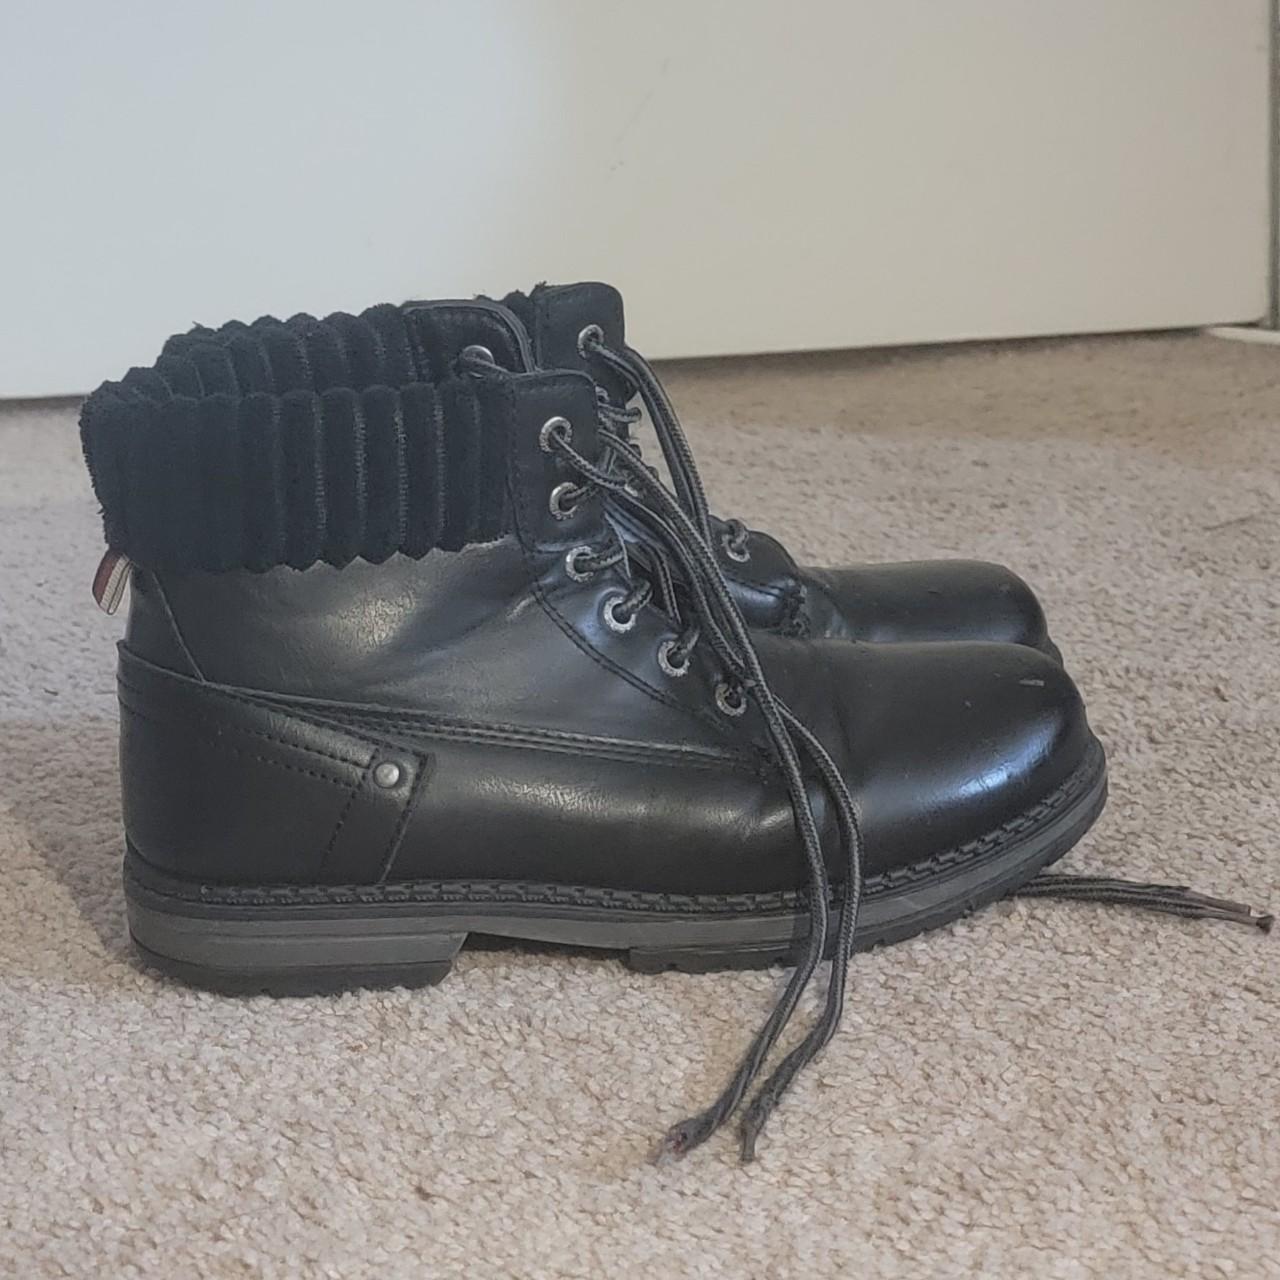 Dirty Laundry Women's Black Boots (2)